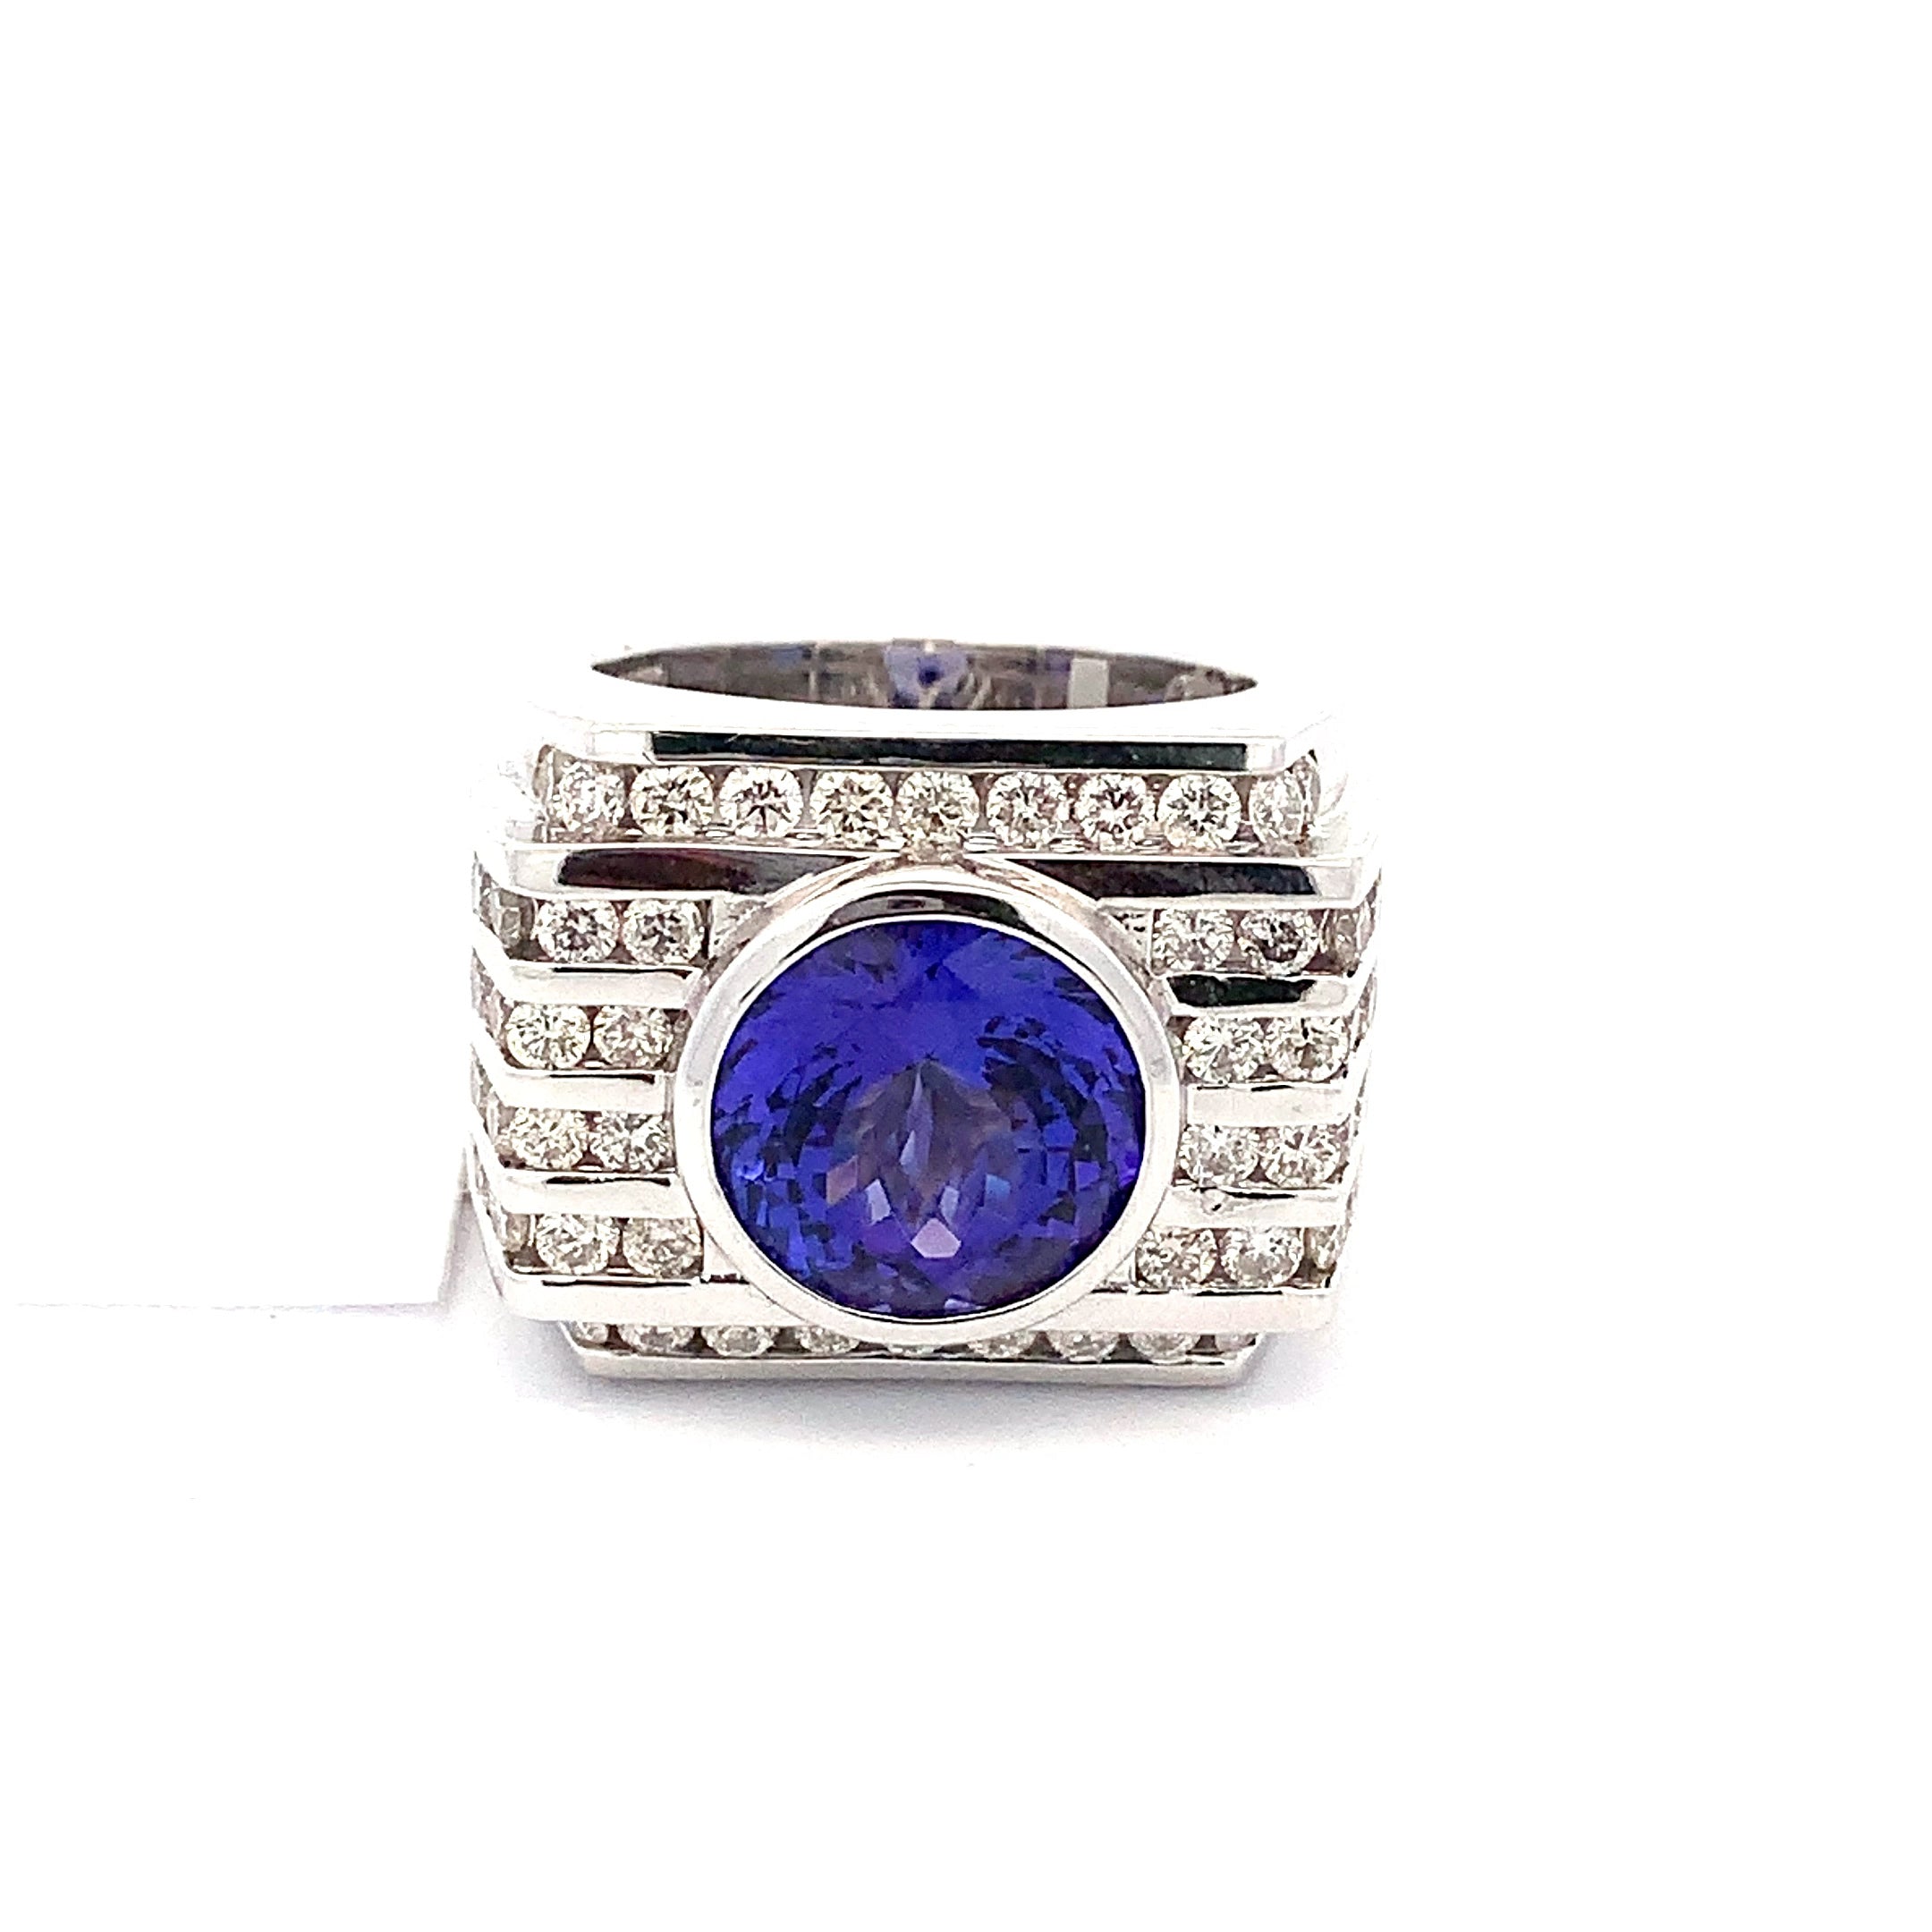 14K Yellow Gold Royal Blue CZ Ring at JewelryVortex.com. Free Shipping over  $100.